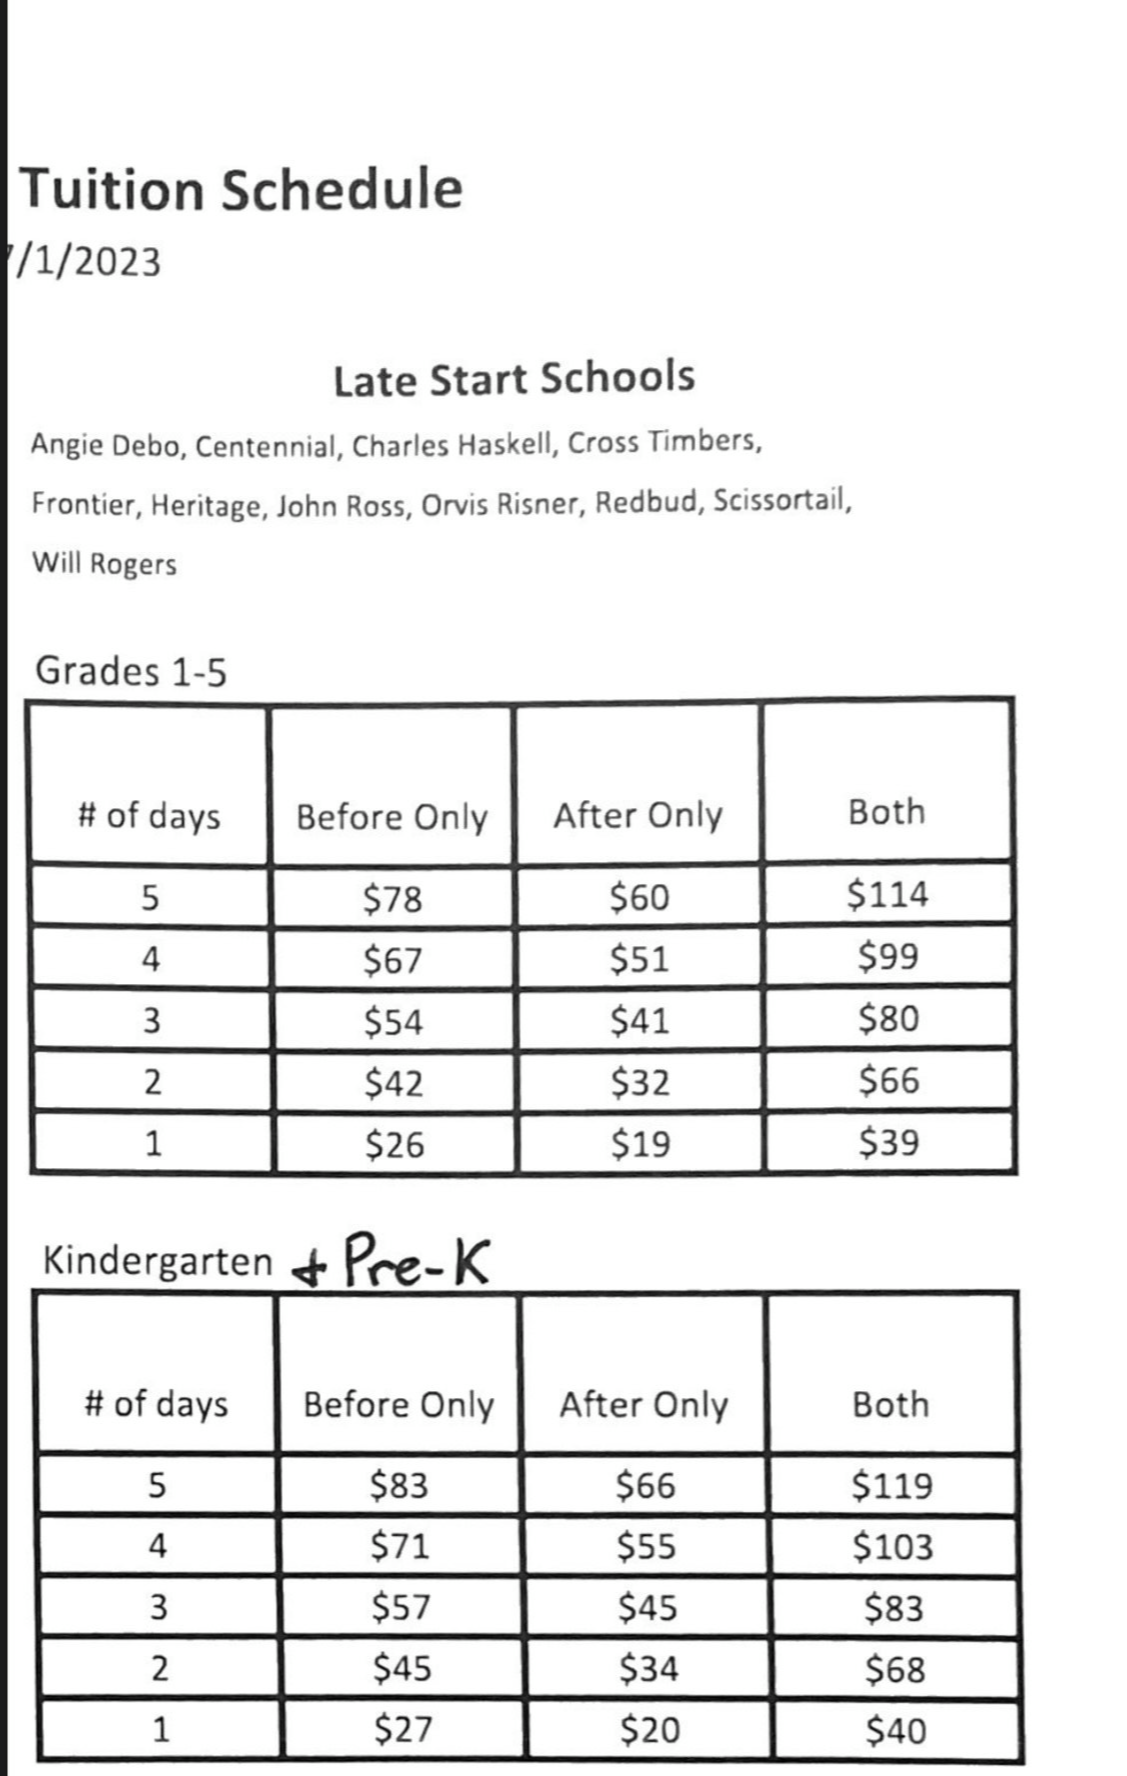 Tuition for Late Start Schools